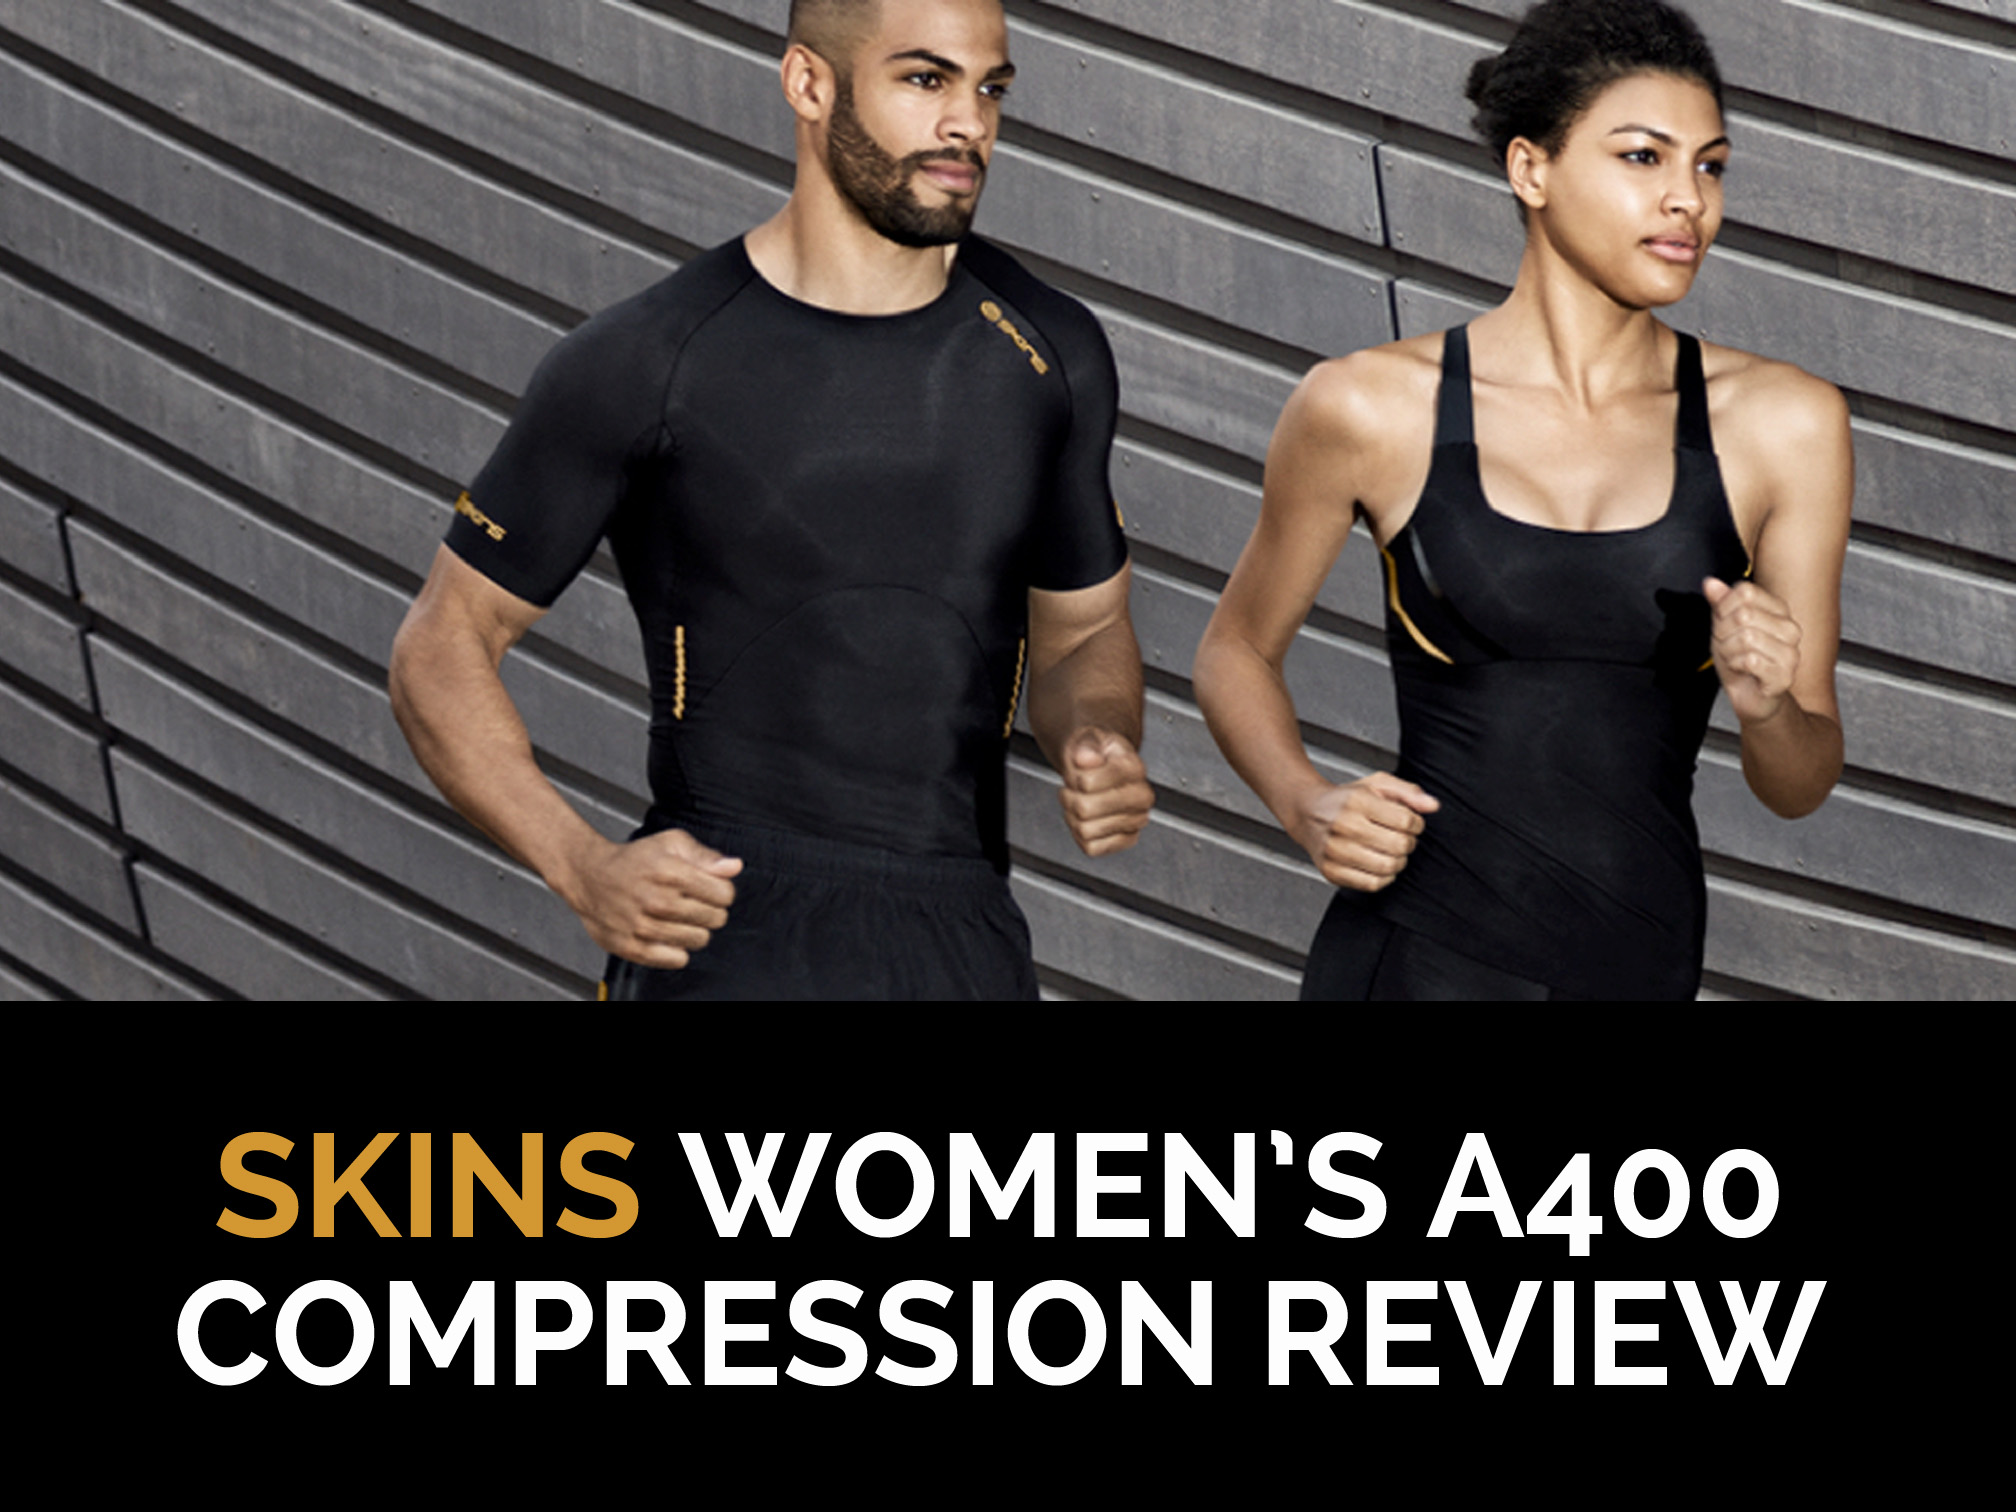 SKINS Introduces New RY400 Range of Compression Clothing